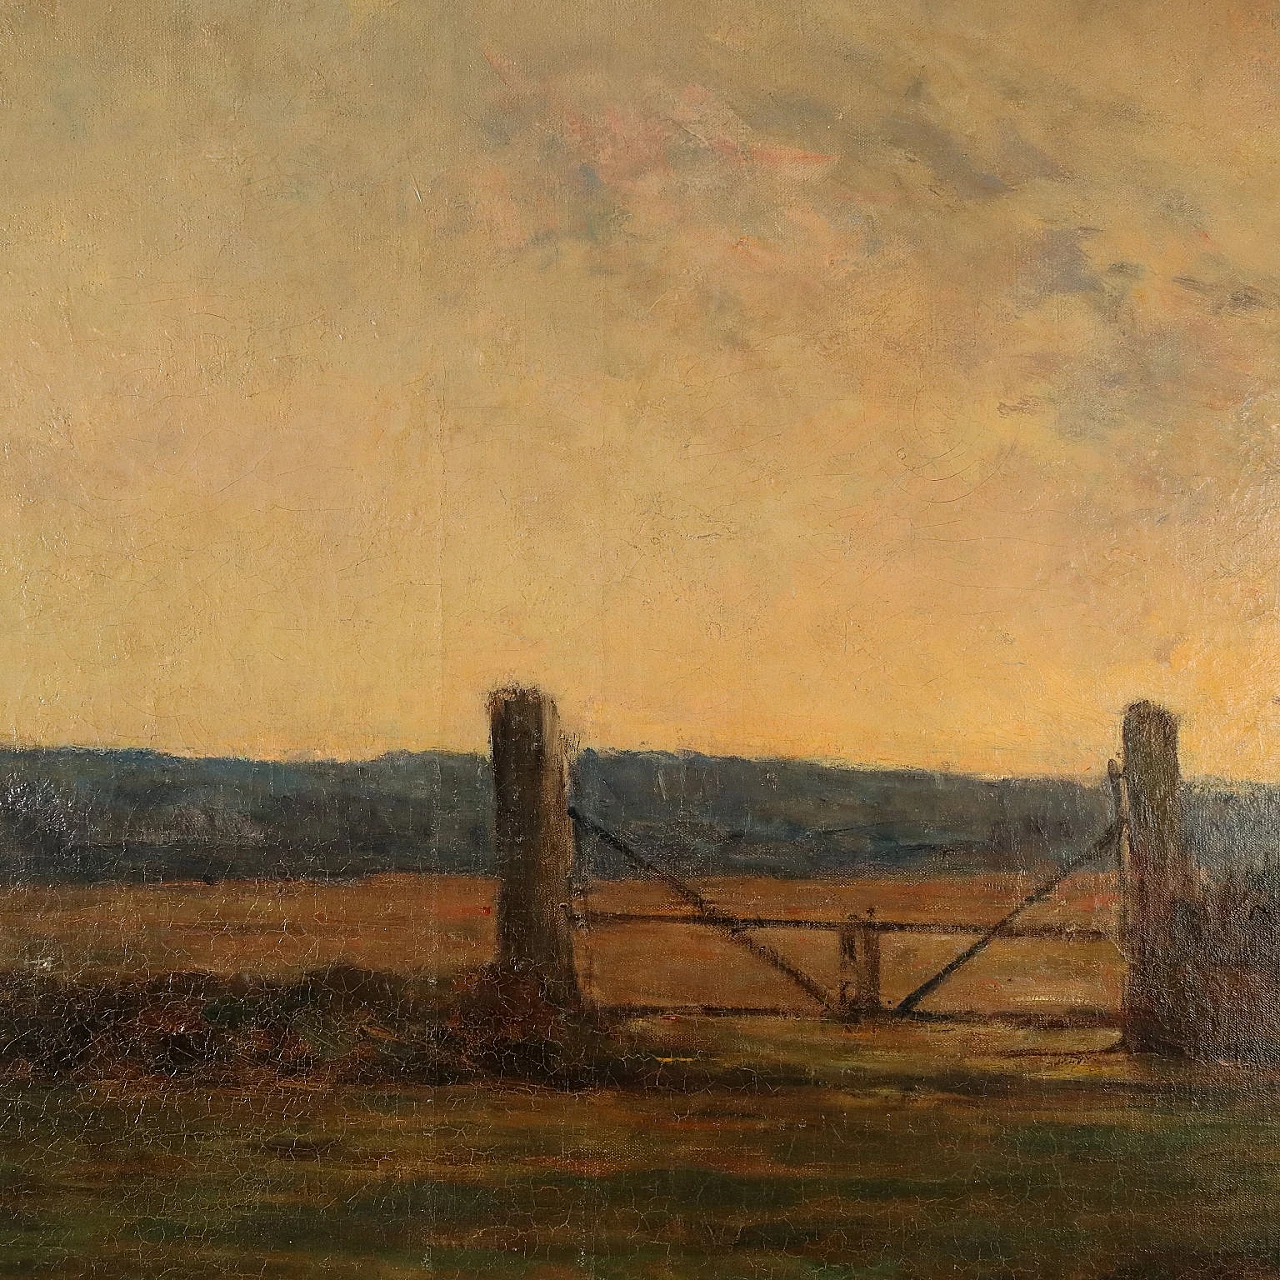 G. Pier Dieterle, Glimpse of countryside with cows, oil on canvas 6